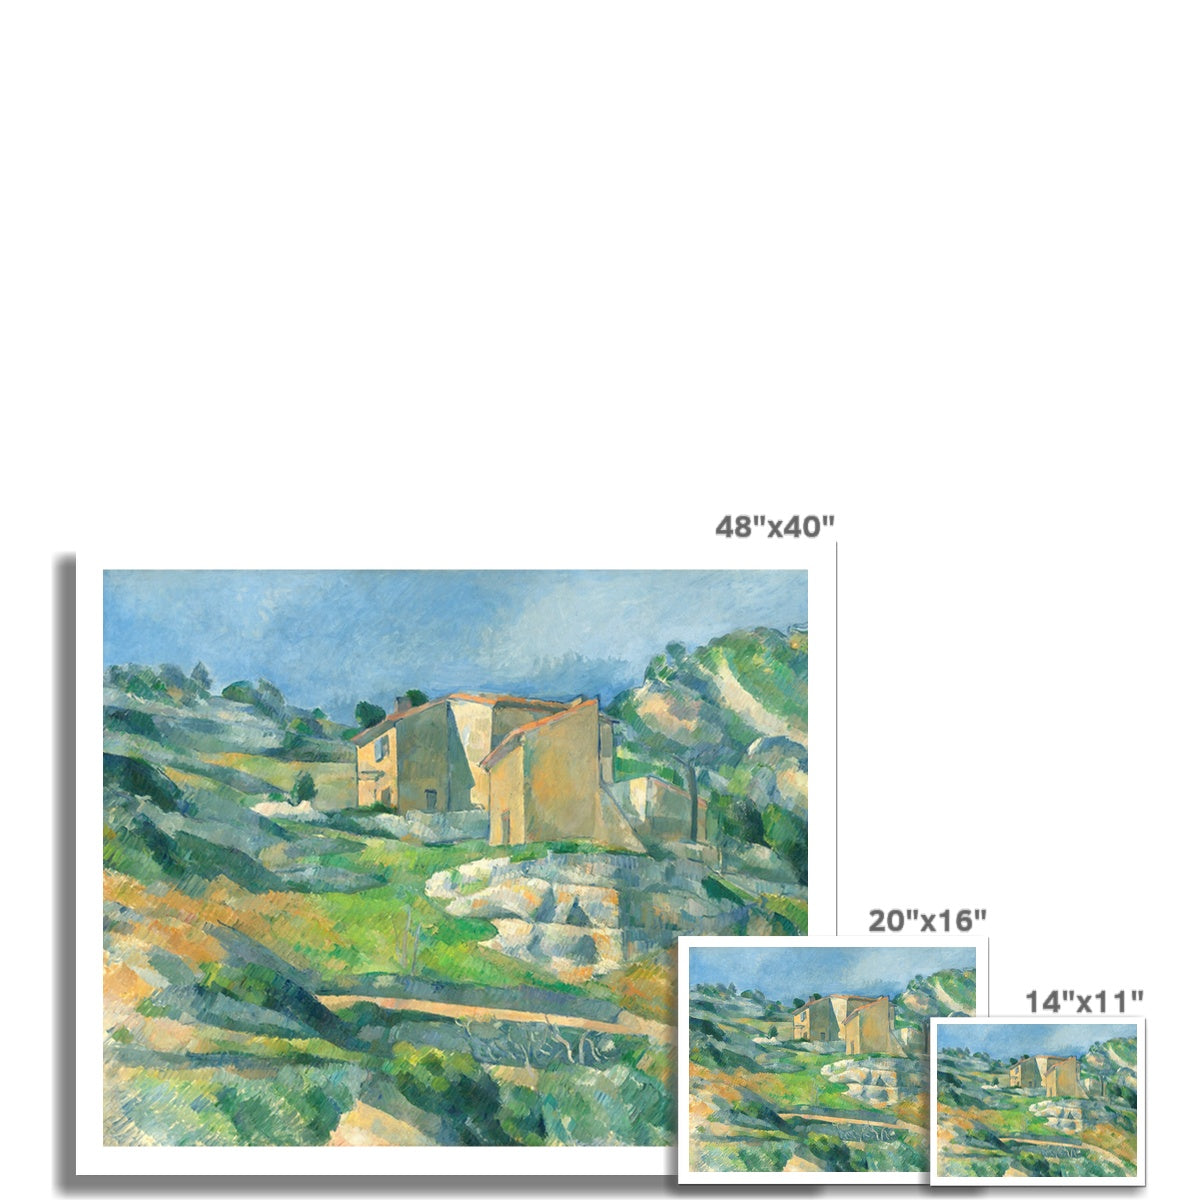 &#39;Houses in Provence, the Riaux Valley near Estaque&#39; by Paul Cézanne. Open Edition Fine Art Print. Historic Art